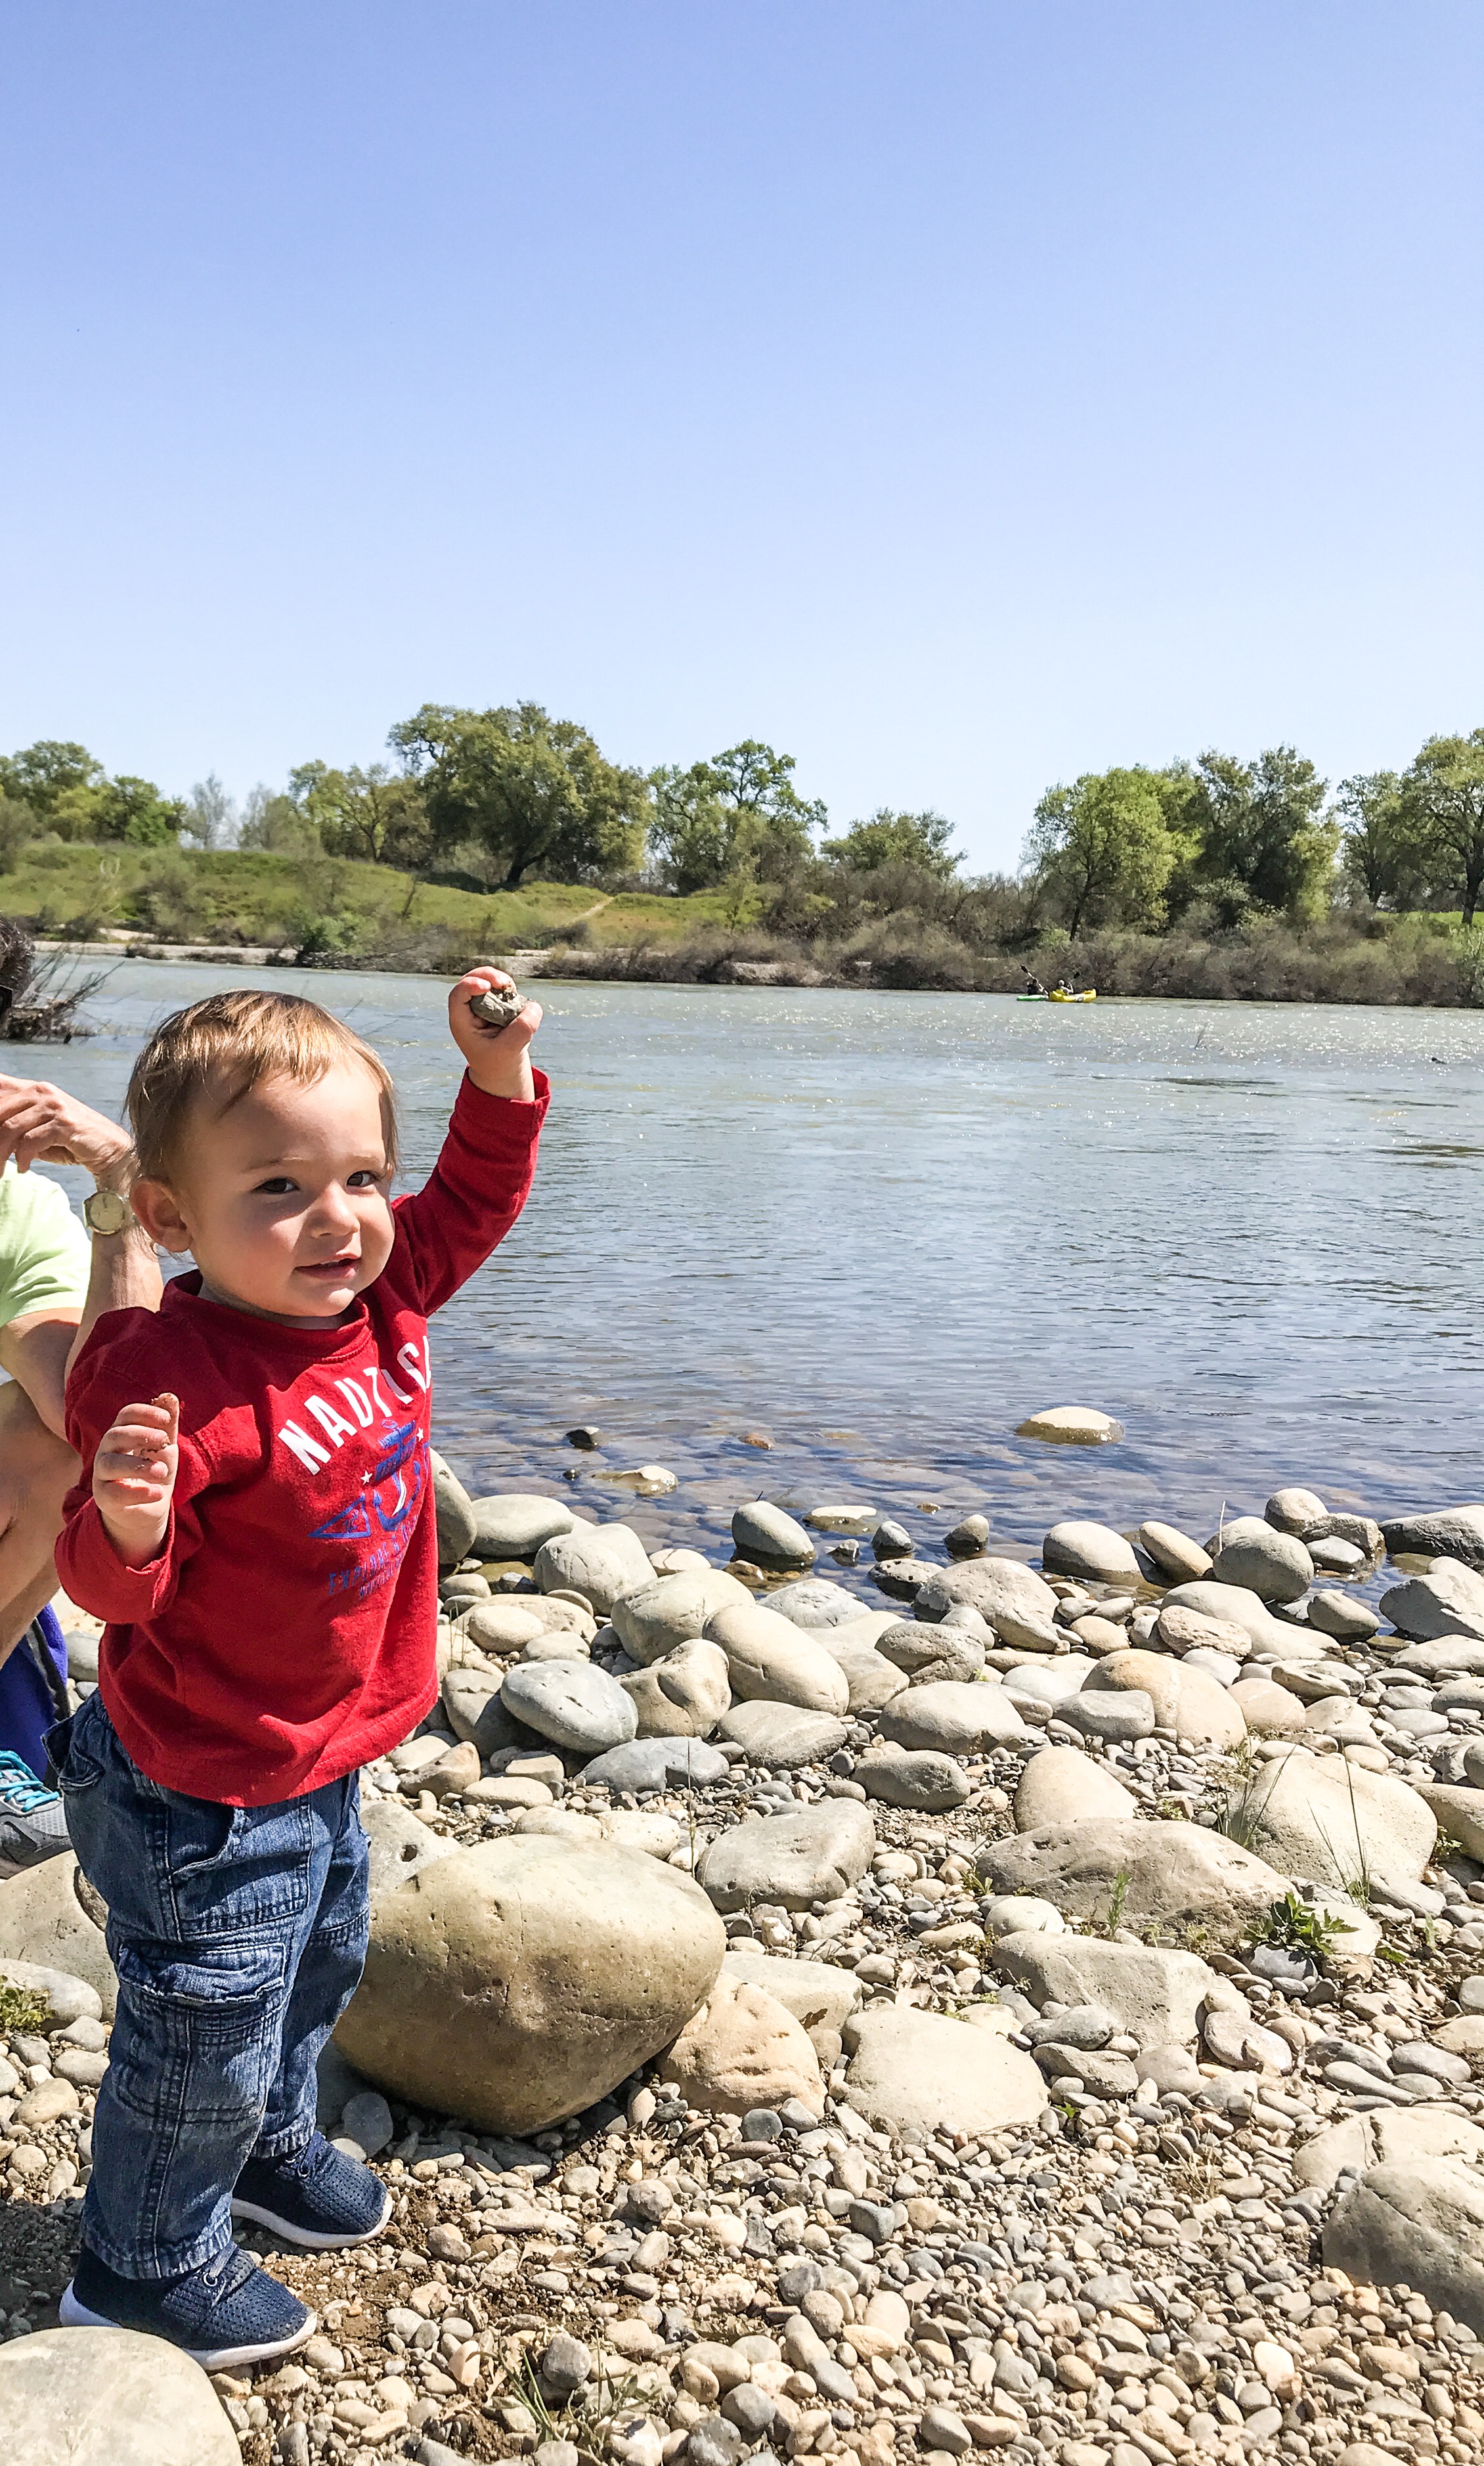 Guide to the Effie Yeaw Nature Center in Sacramento | Things to Do in Sacramento with Kids | Henry and Andrew’s Guide (www.henryandandrewsguide.com)